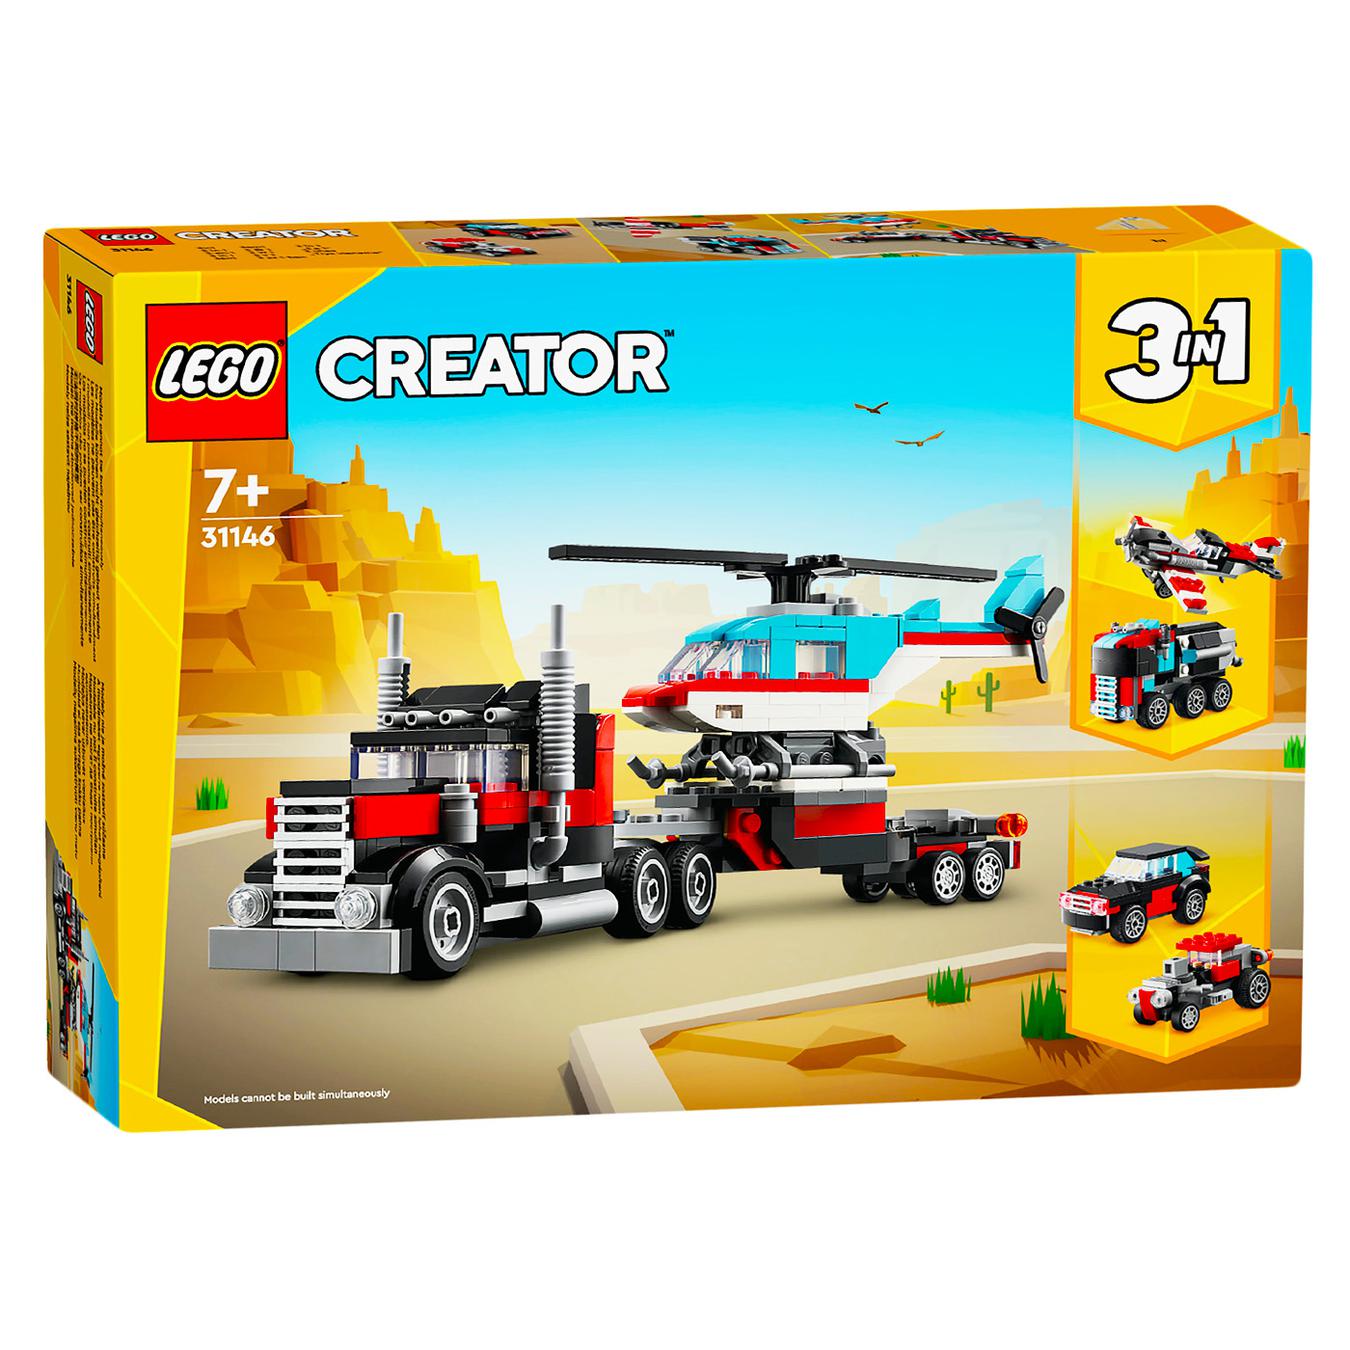 Constructor LEGO Creator 3 in 1 31146 On-board truck with a helicopter